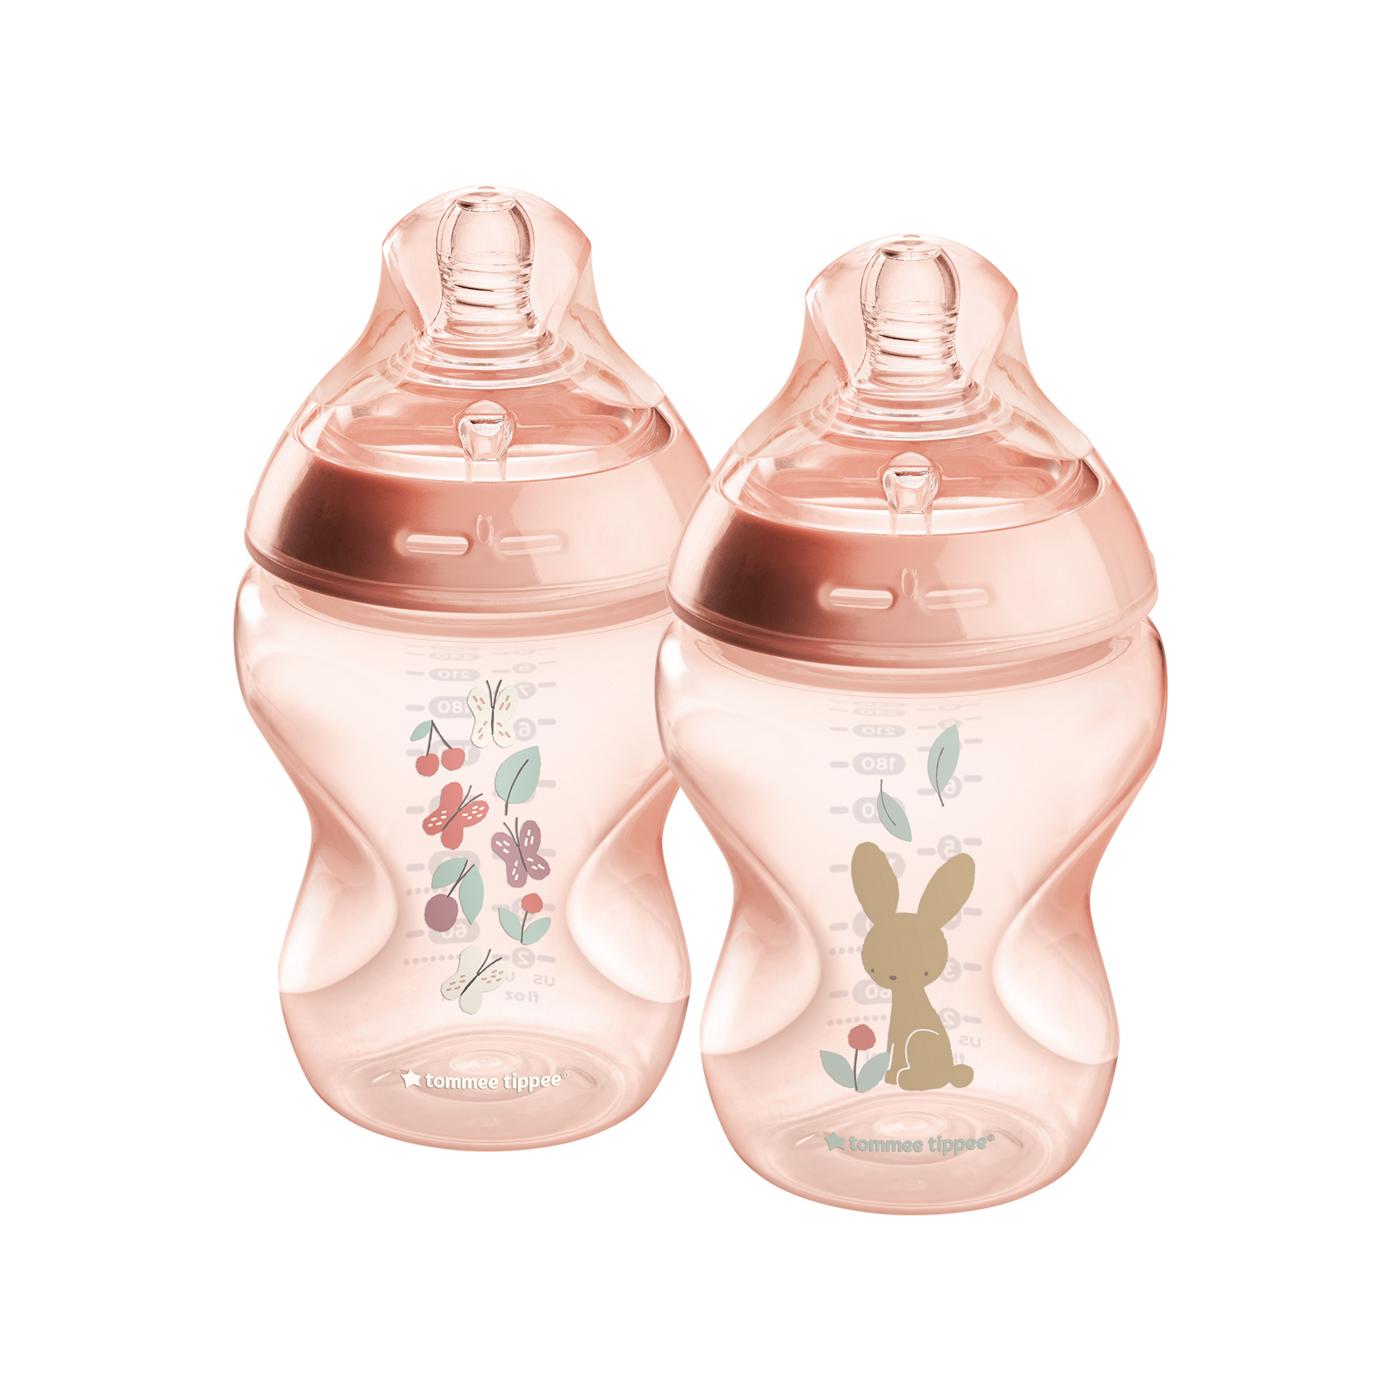 Tommee Tippee Natural Start Anti-Colic Bottles - Rose; image 2 of 2